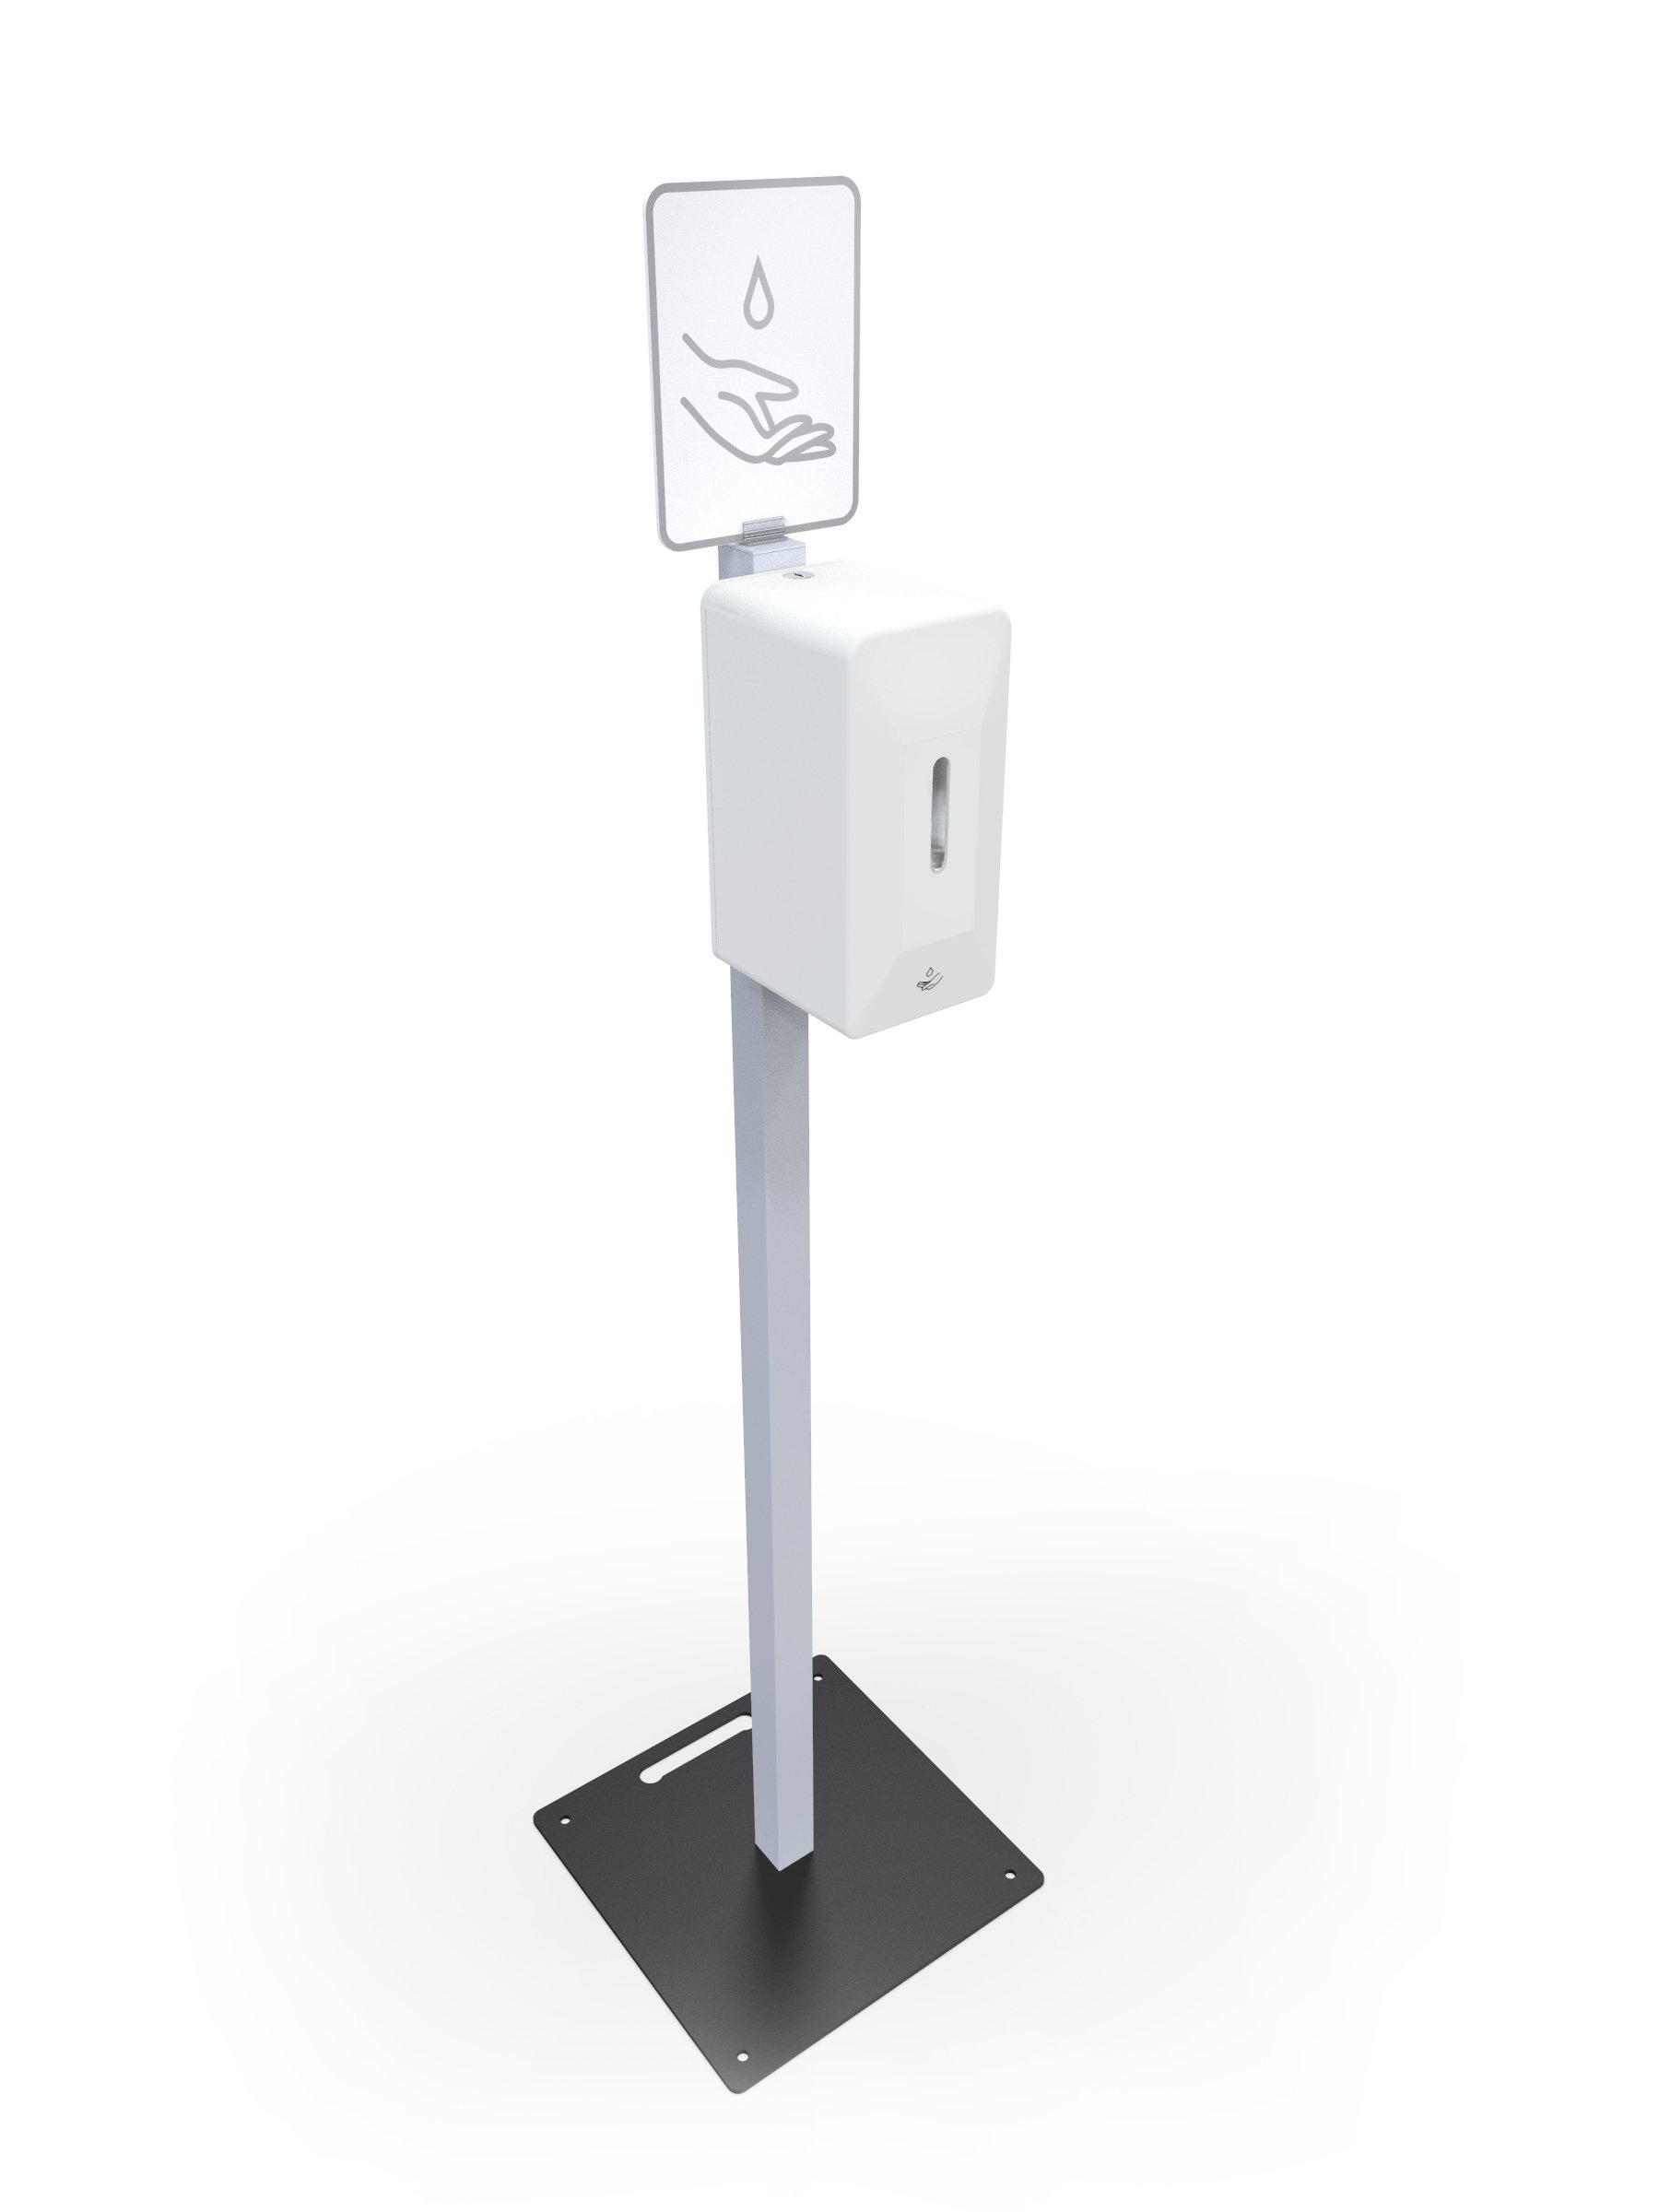 Free automatic standing hand sanitiser dispenser, aluminium stand, steel foot, free UK delivery. www.ontimeprint.co.uk